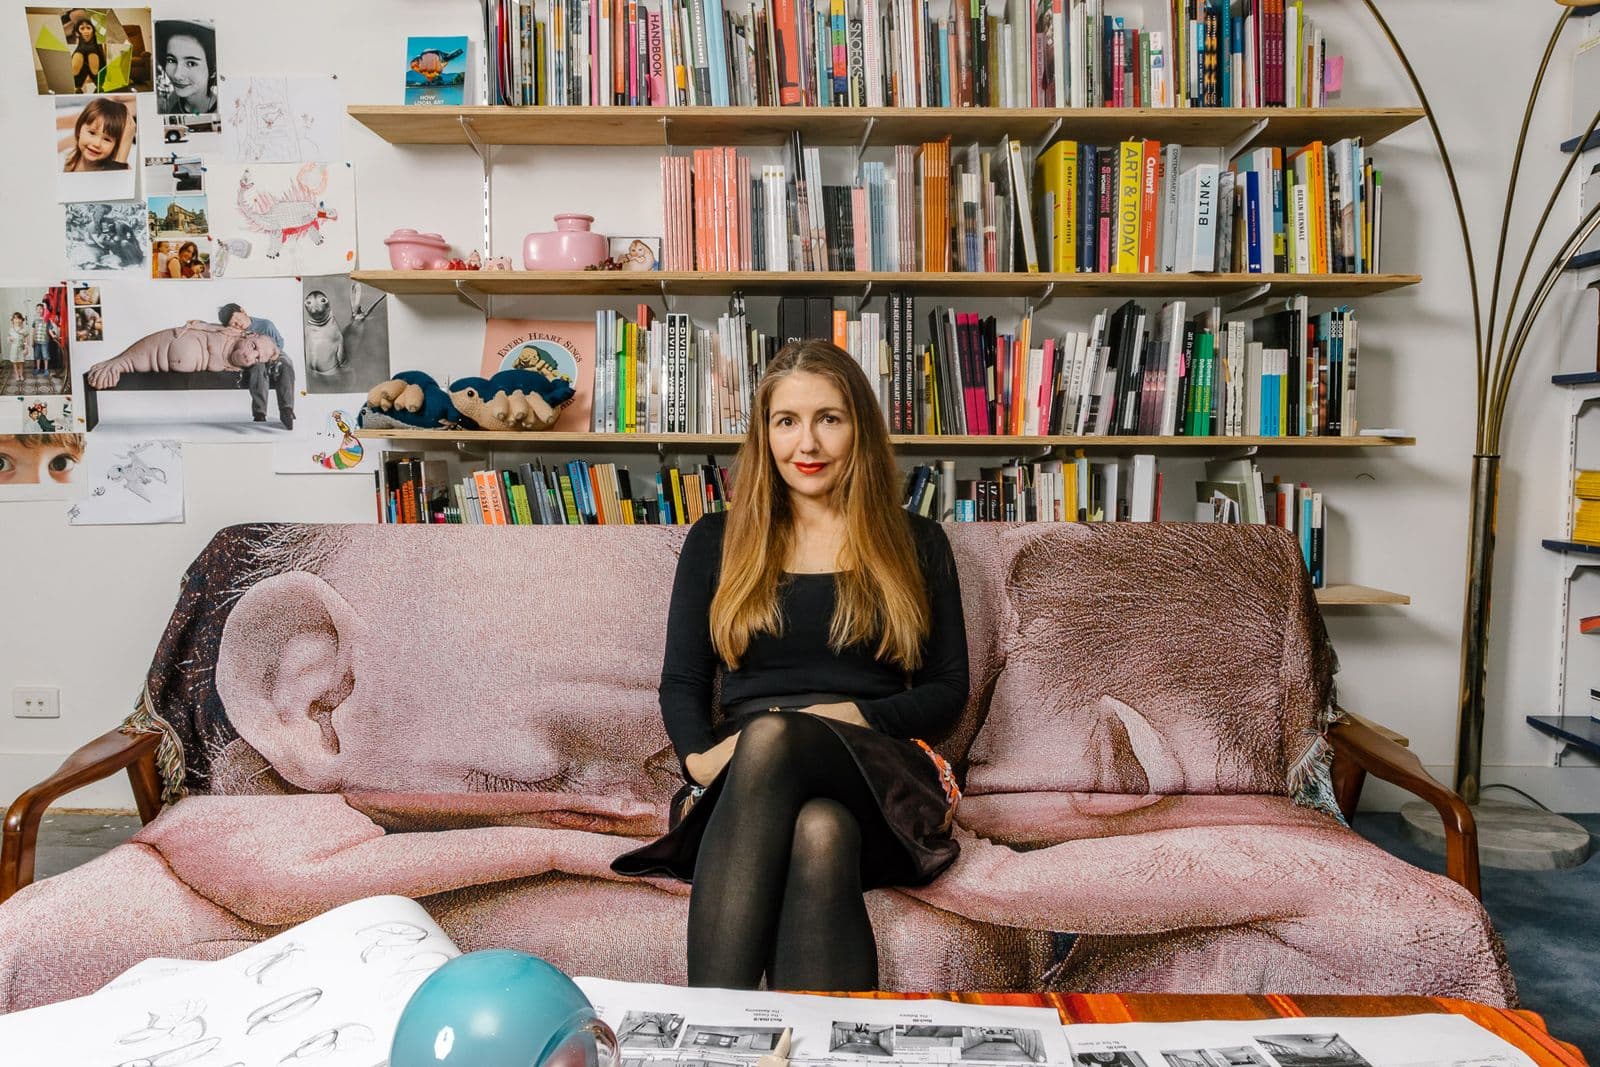 Artist Patricia Piccinini sits on a pink couch with a shelf of books in the background.